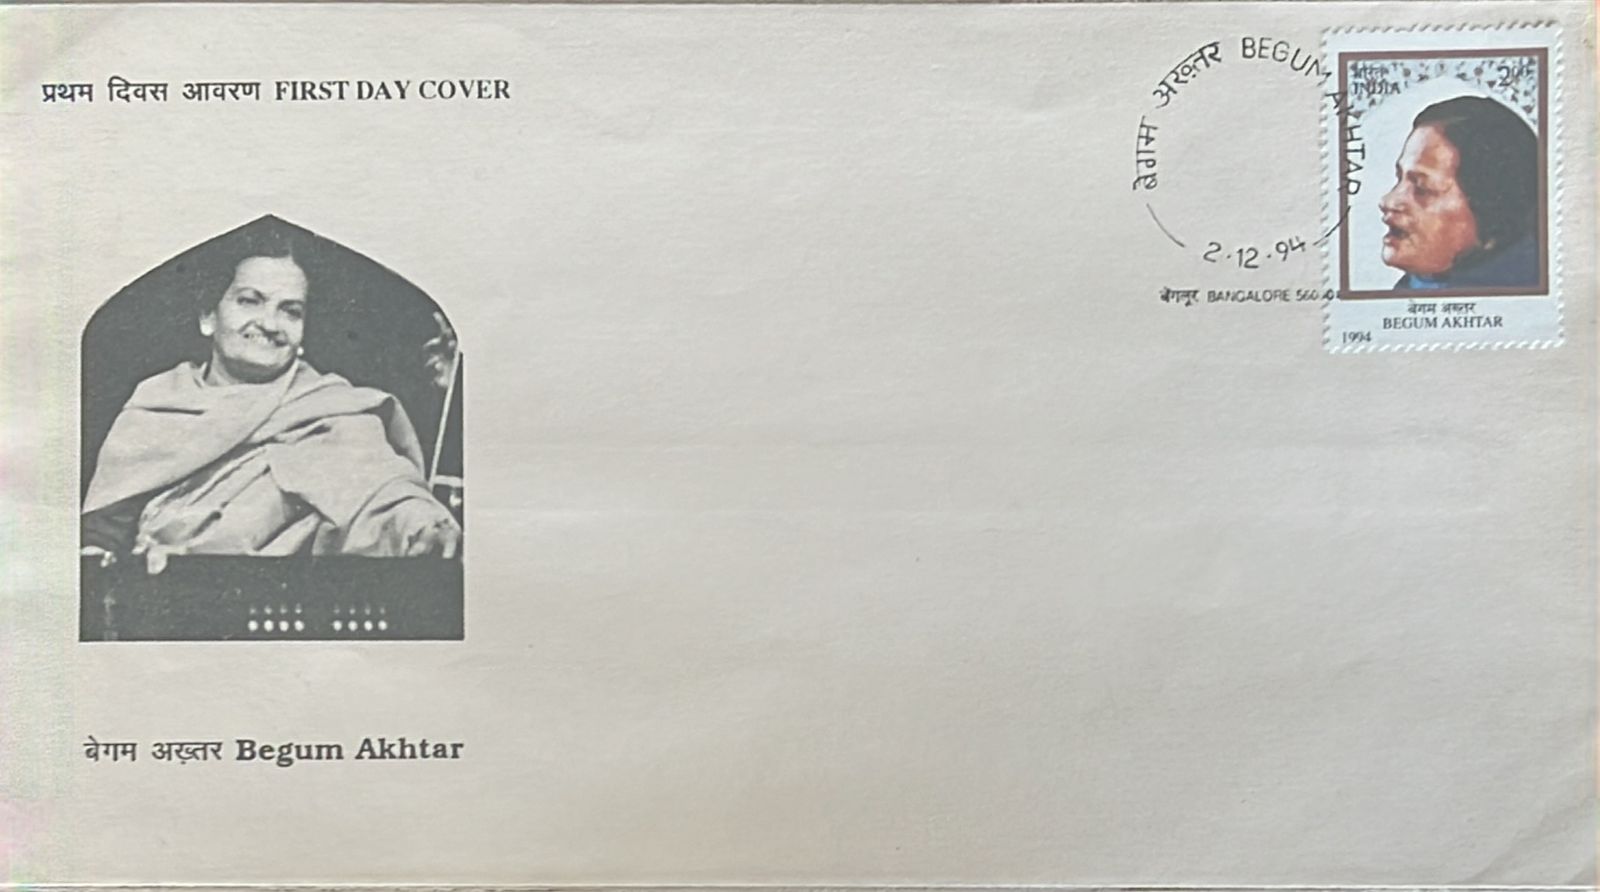 India 1994 Begum Akhtar Withdrawn Stamp FDC Rare